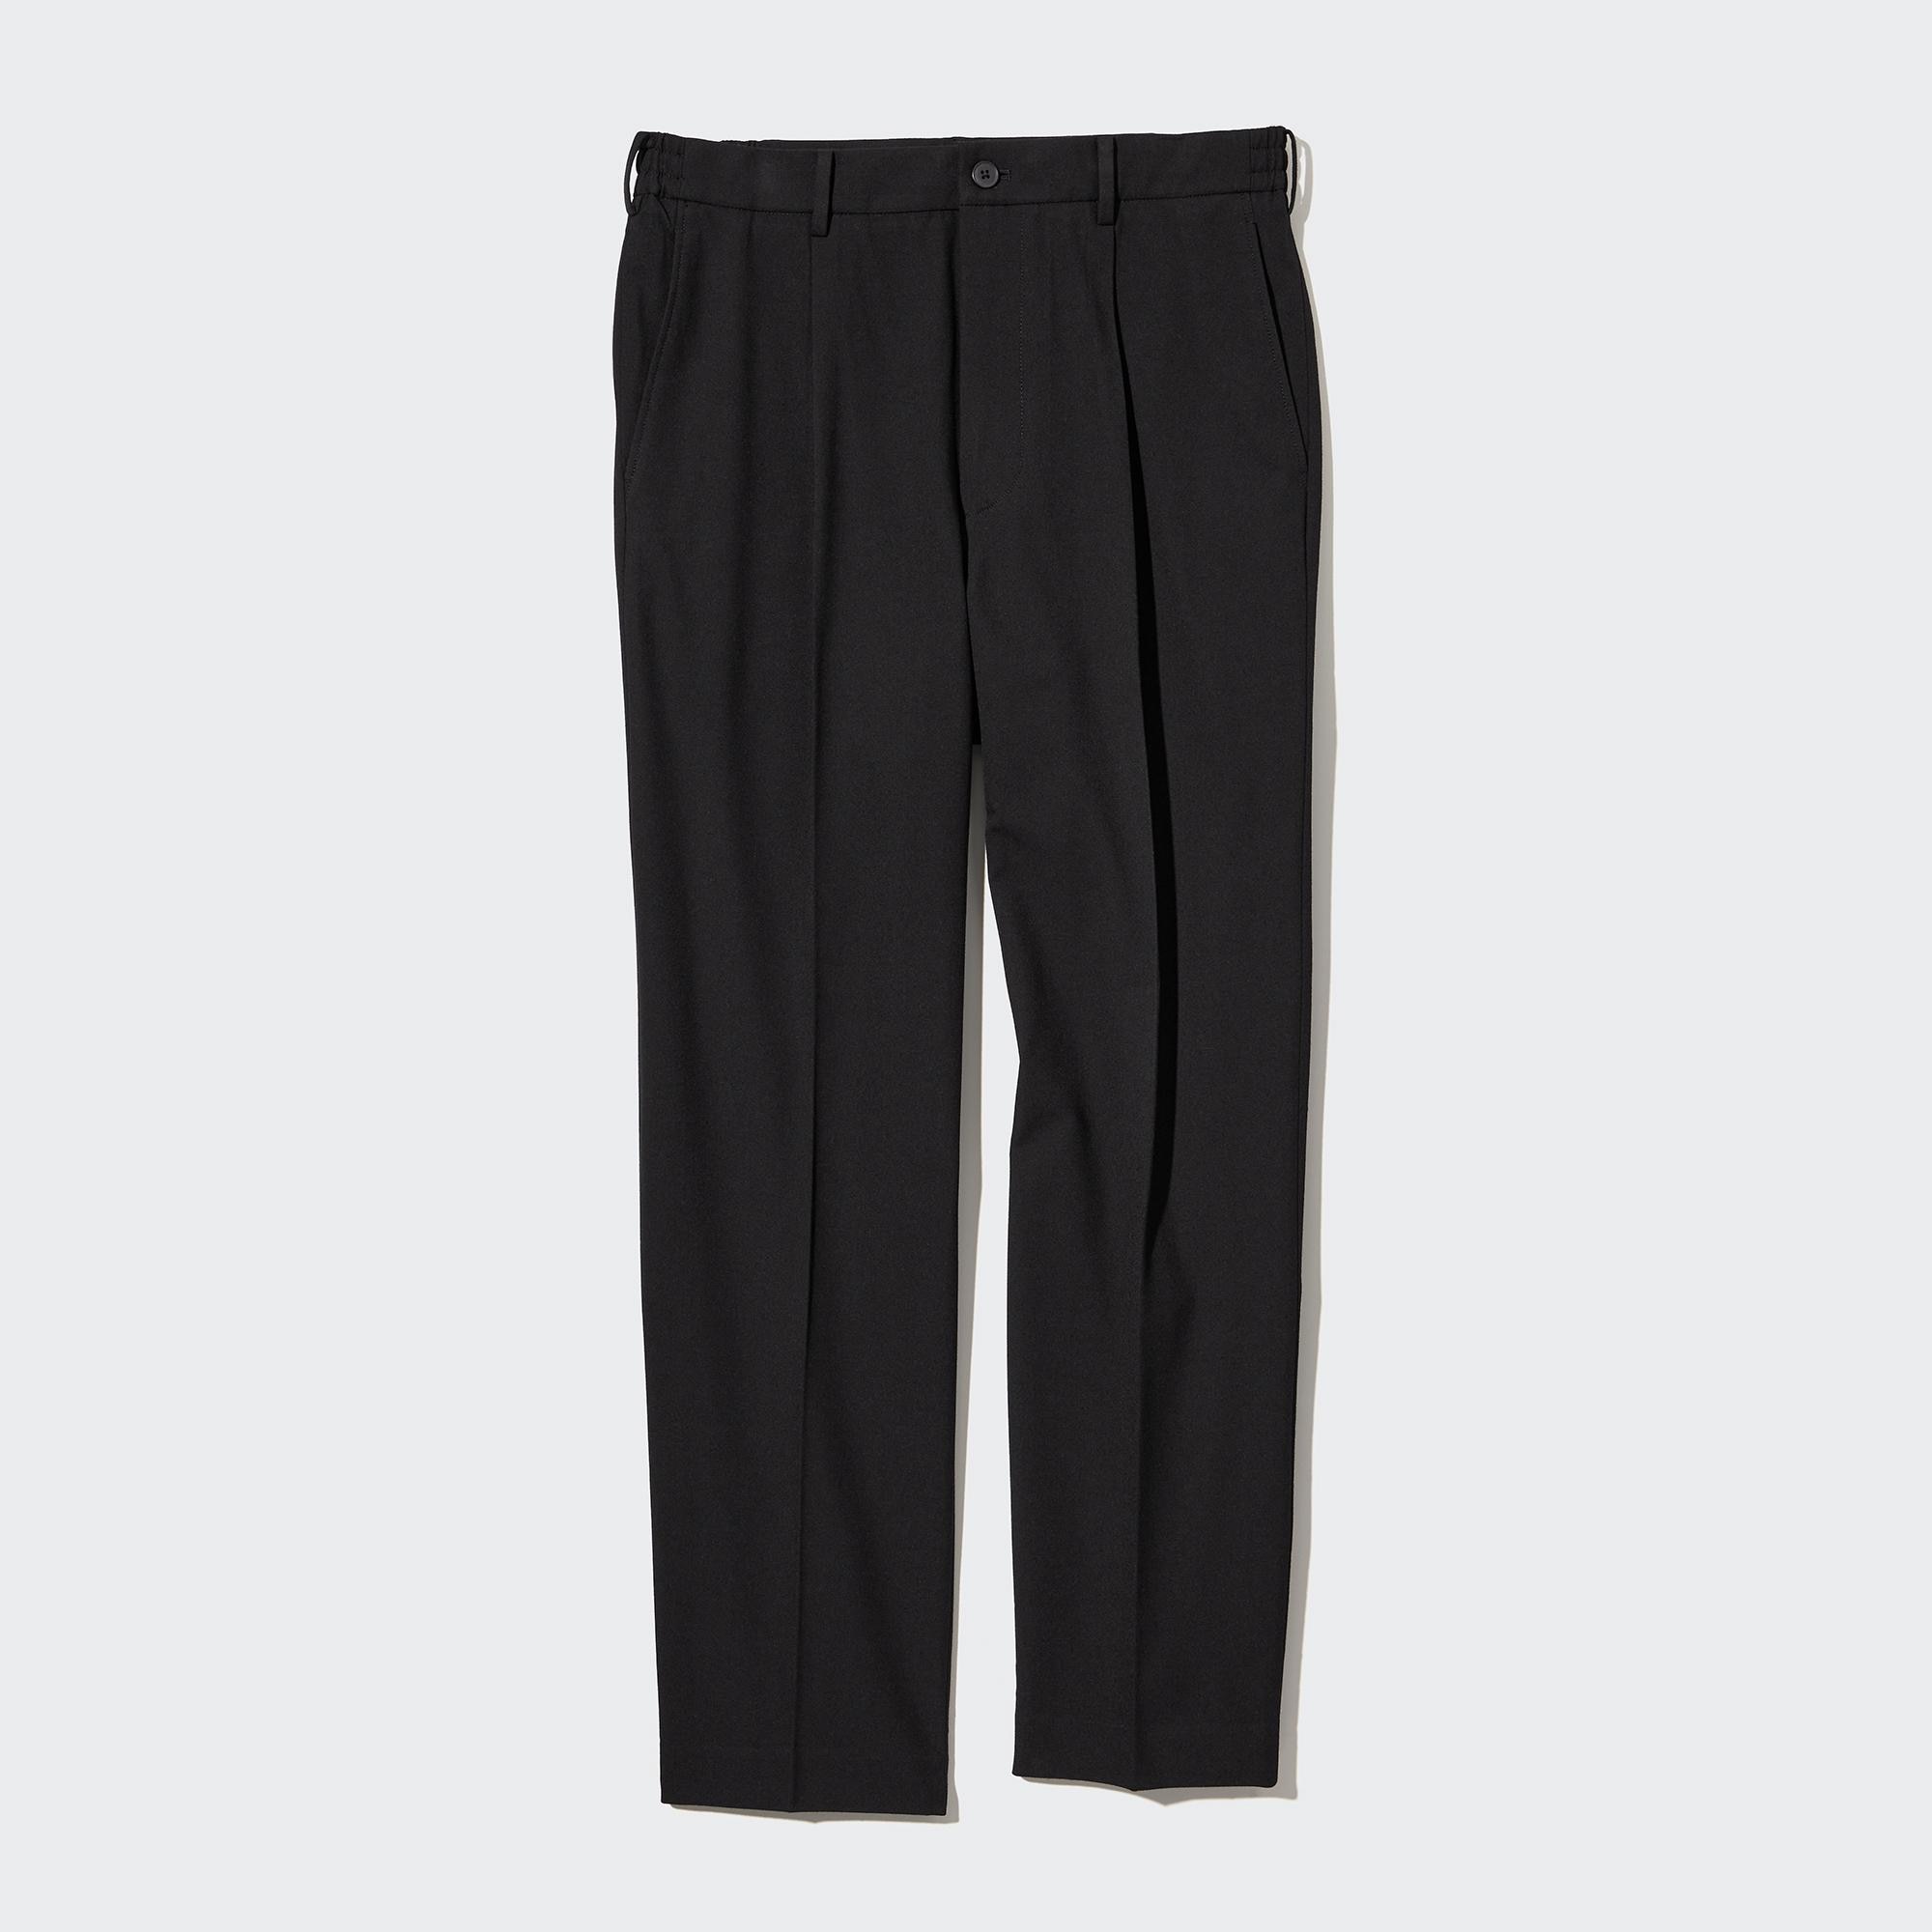 08 / Pleated Trousers Black – Oftt